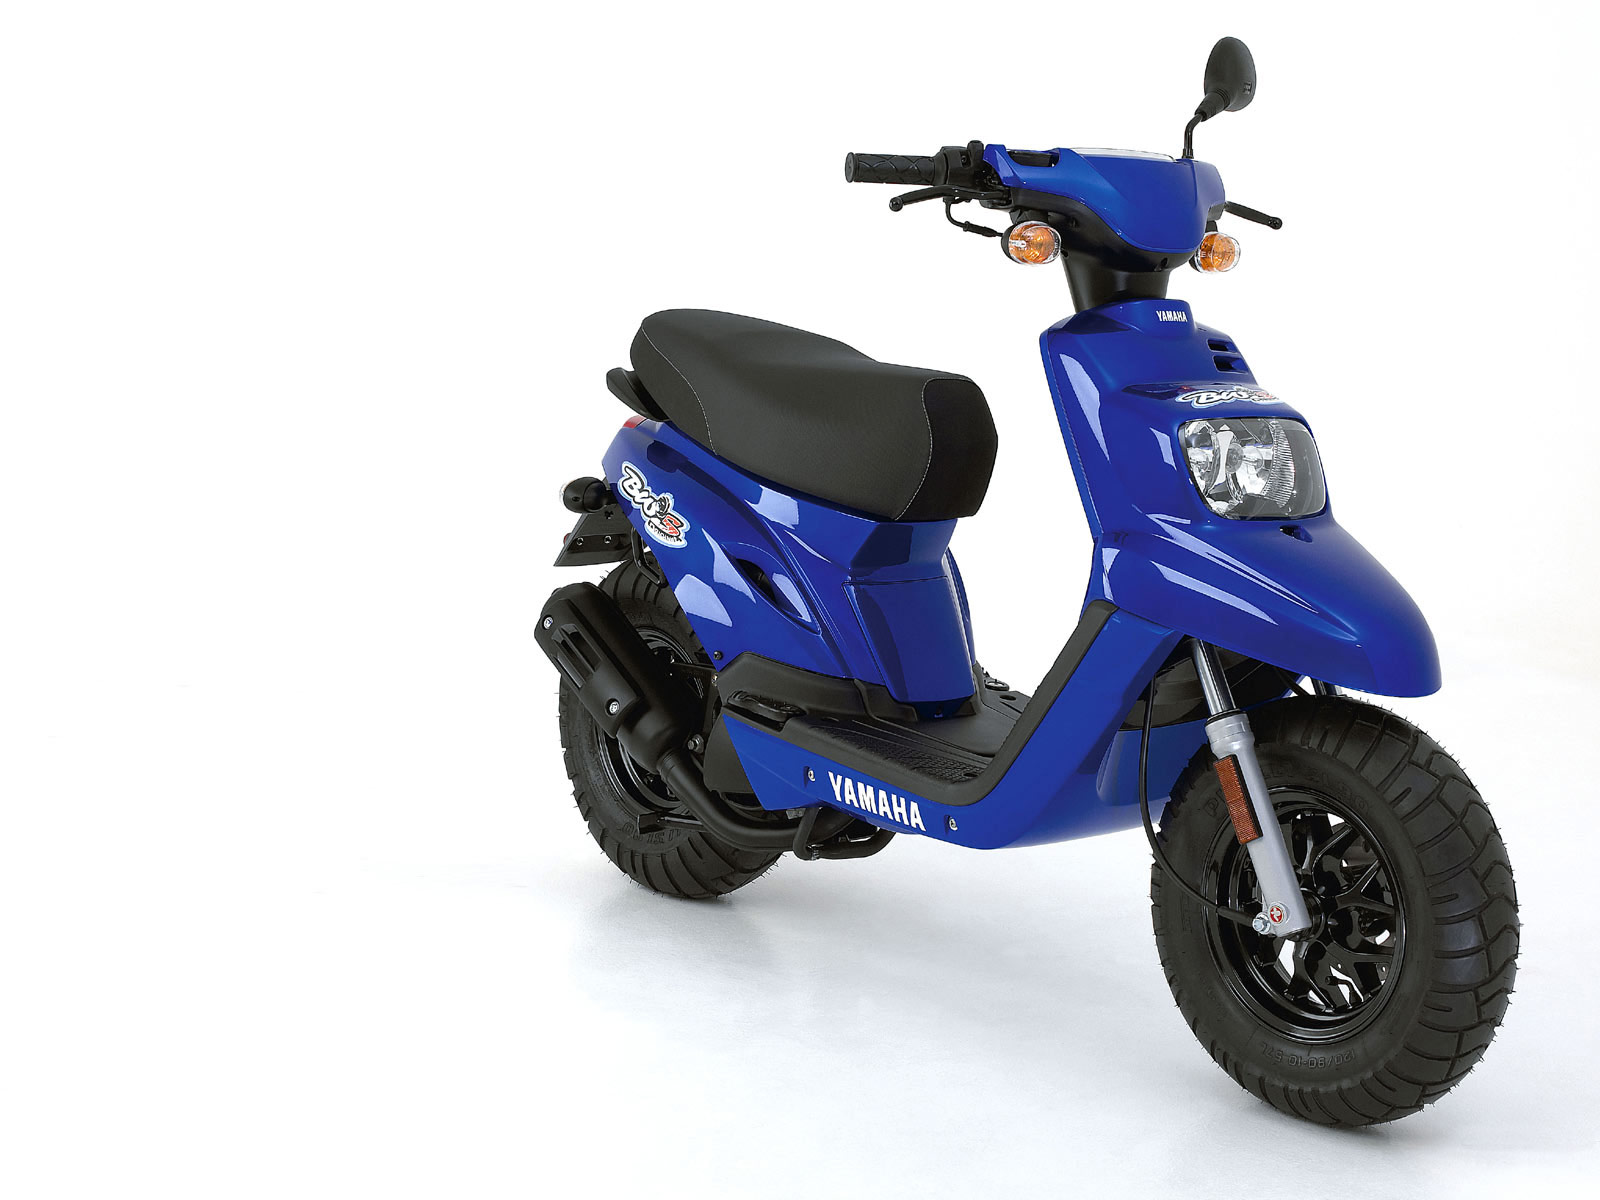 2005 YAMAHA BWs Scooter pictures, insurance information | Cars Games Today